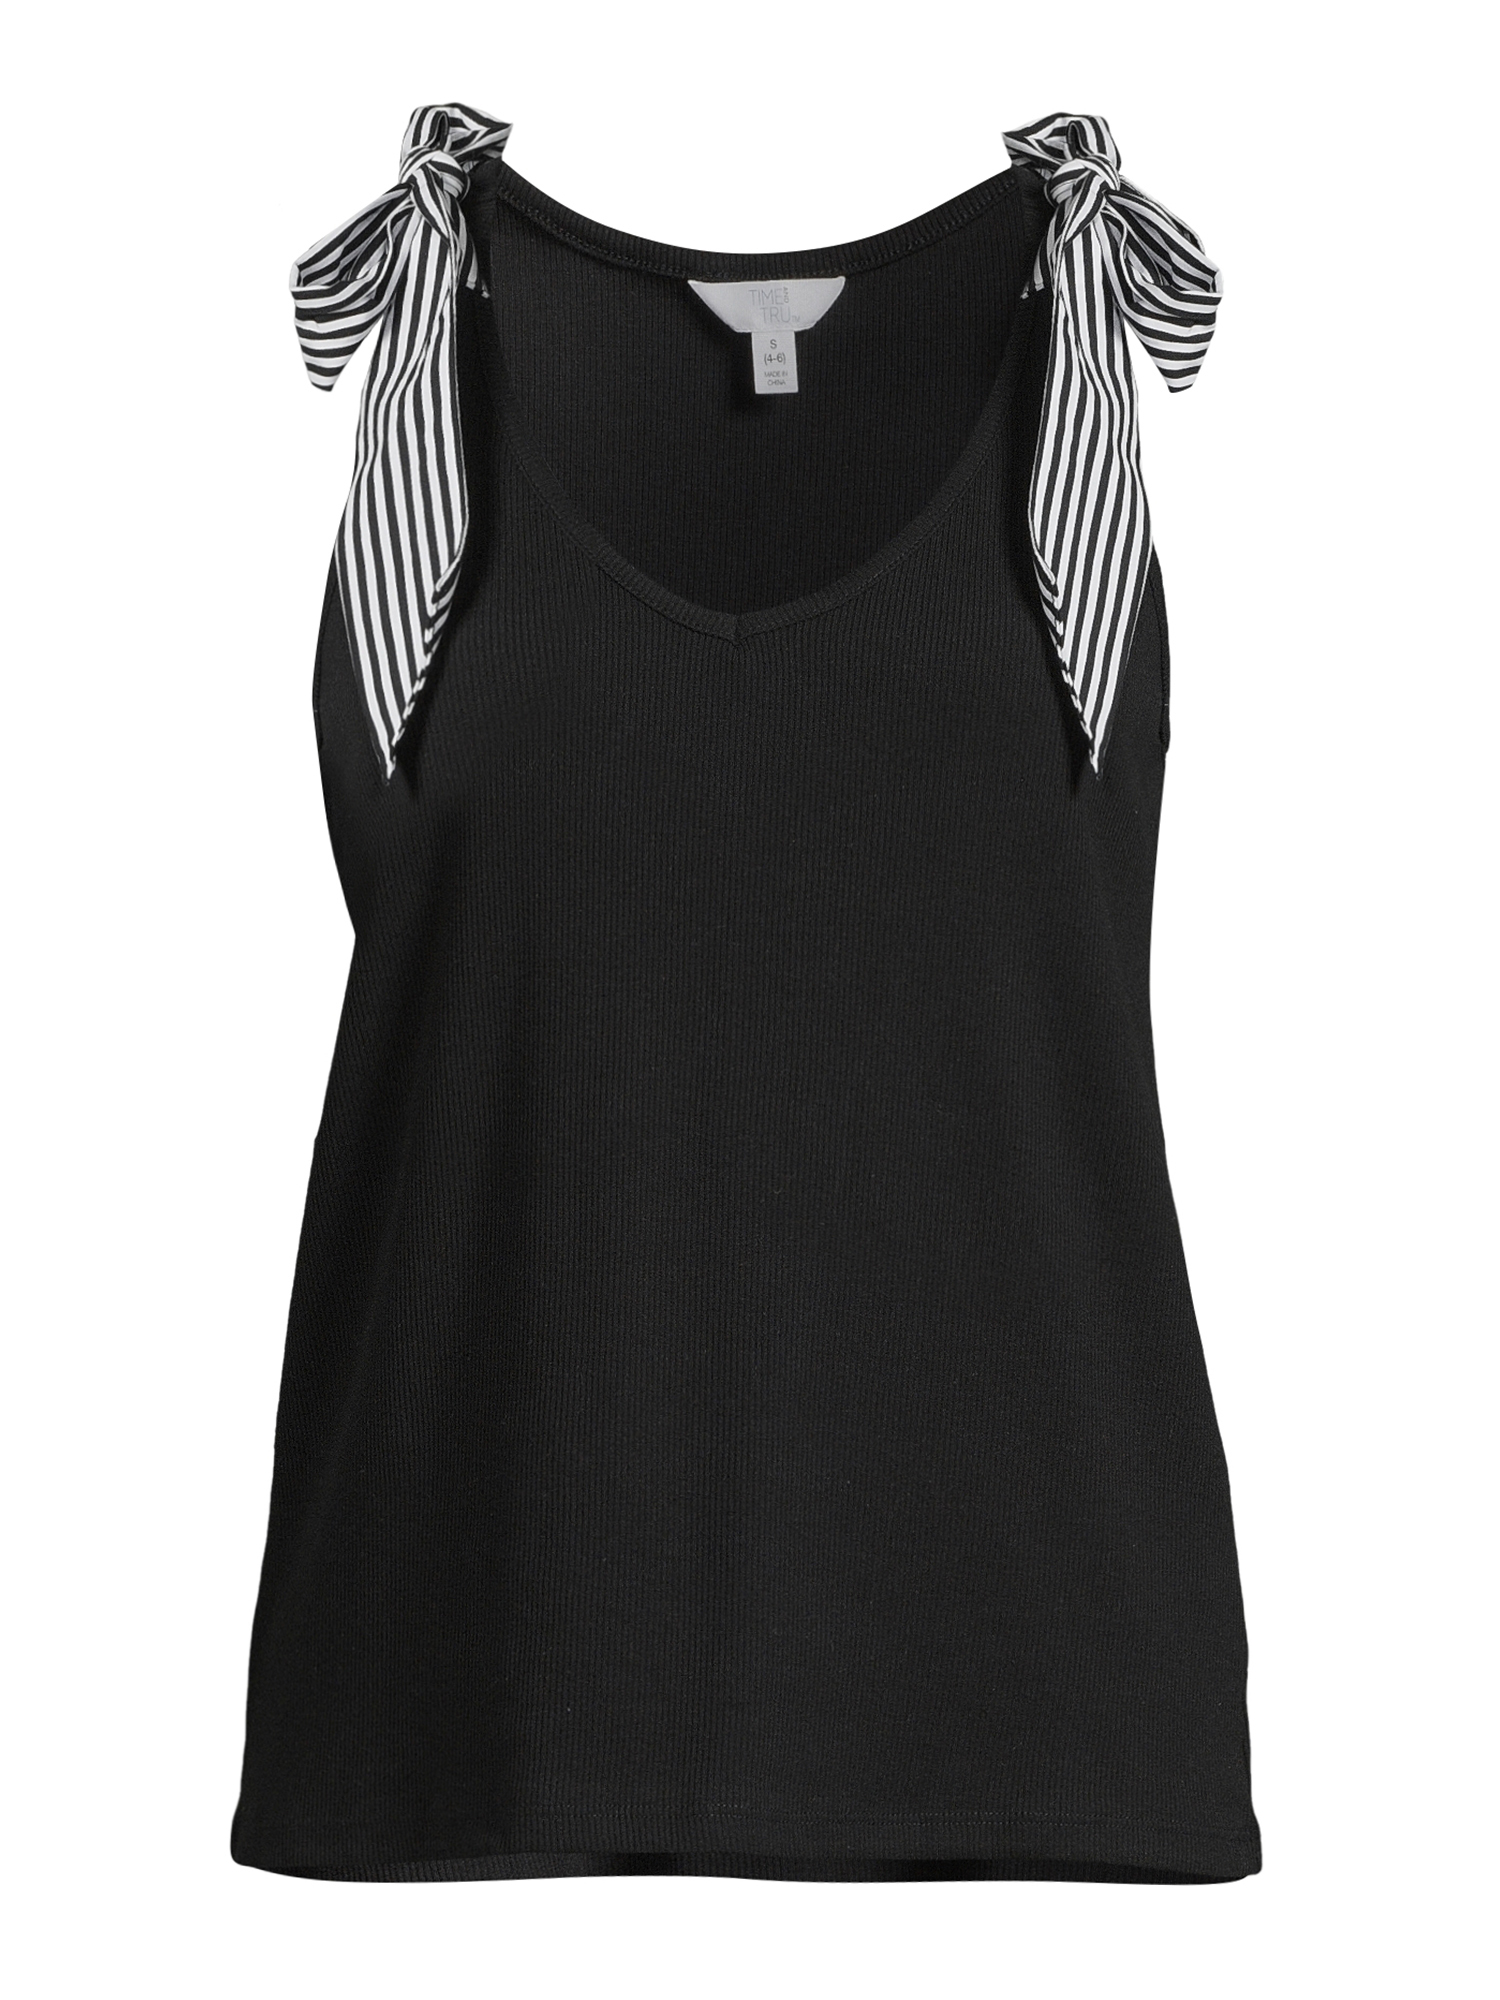 Time and Tru Women's Bow Shoulder Tank Top - image 5 of 5